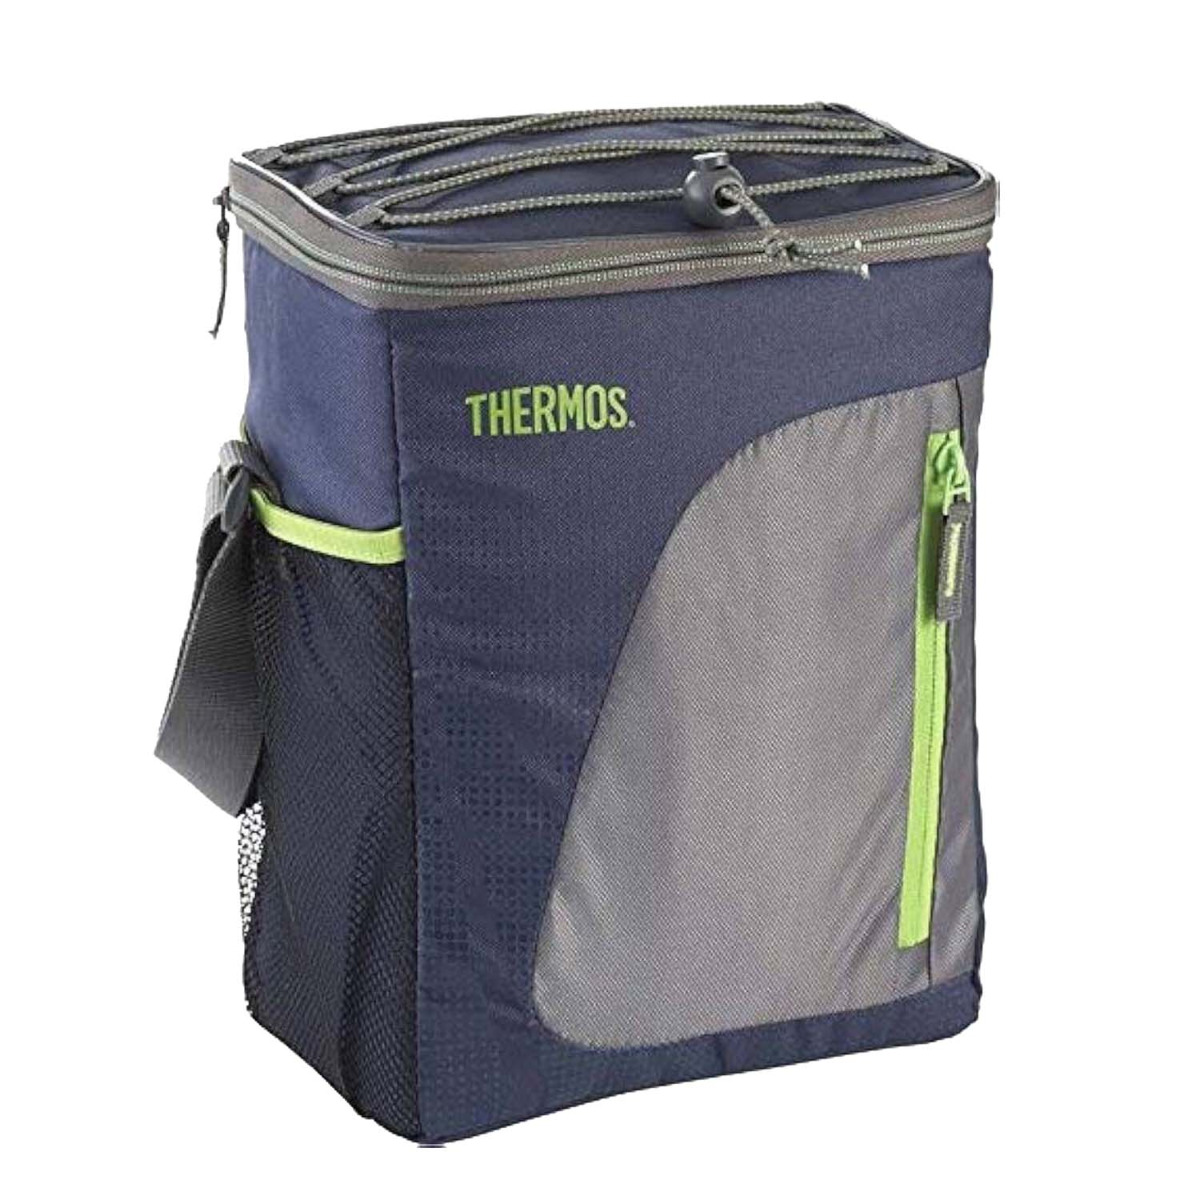 THERMOS RADIANCE 12 CAN COOLER angle 